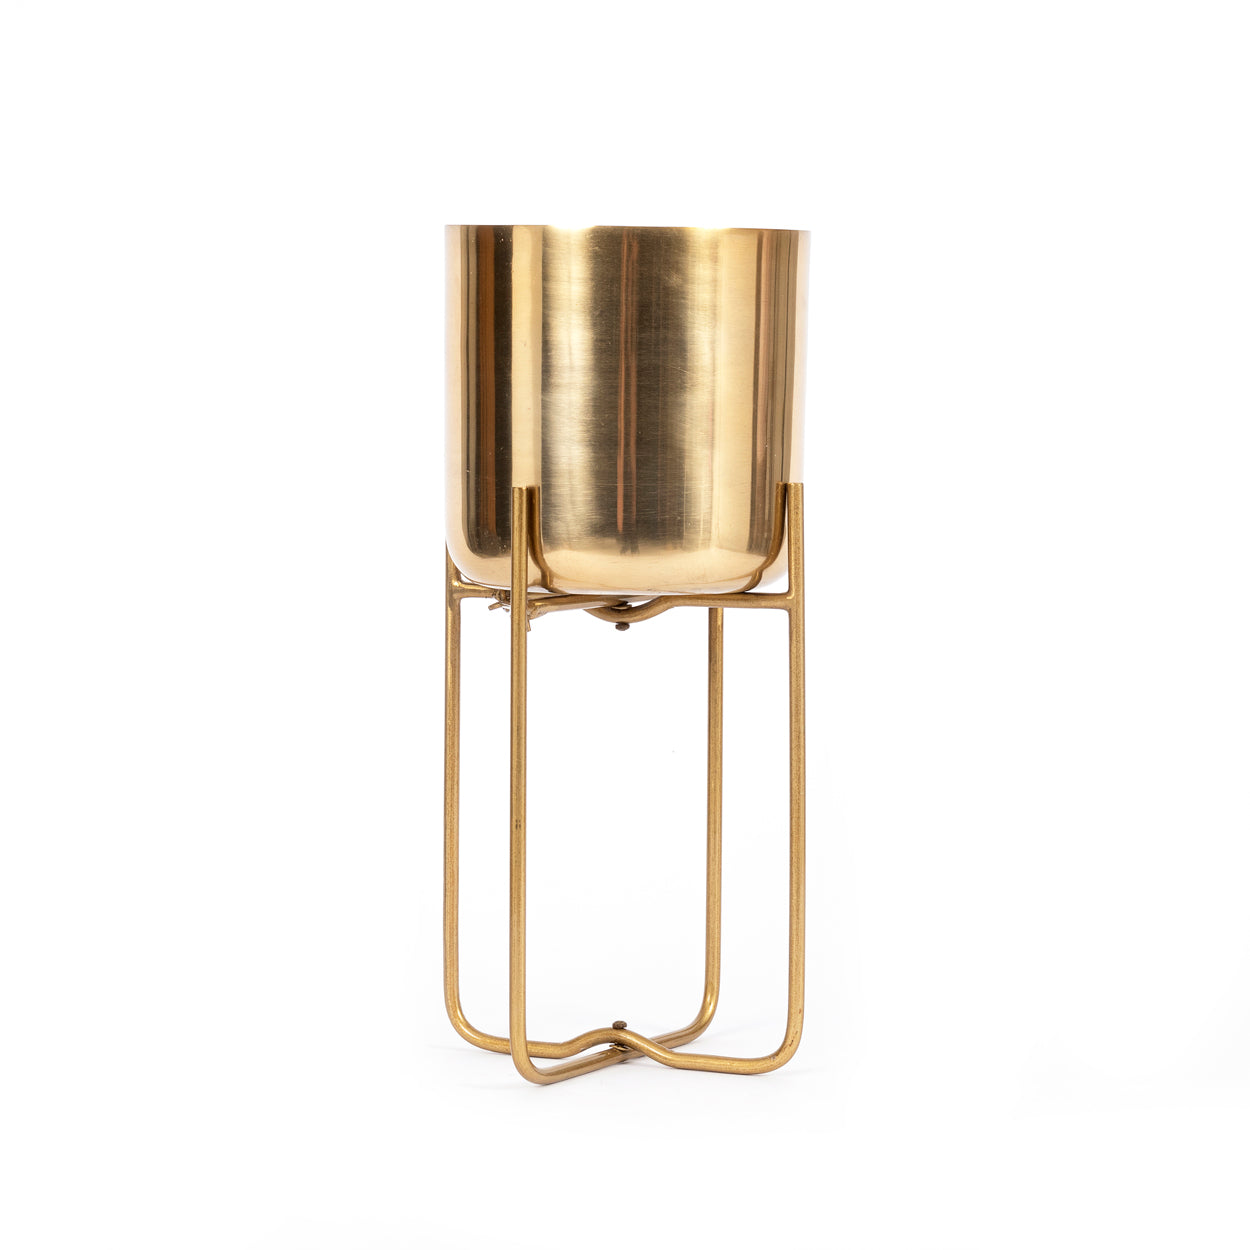 THE BRASS Planter On Stand large